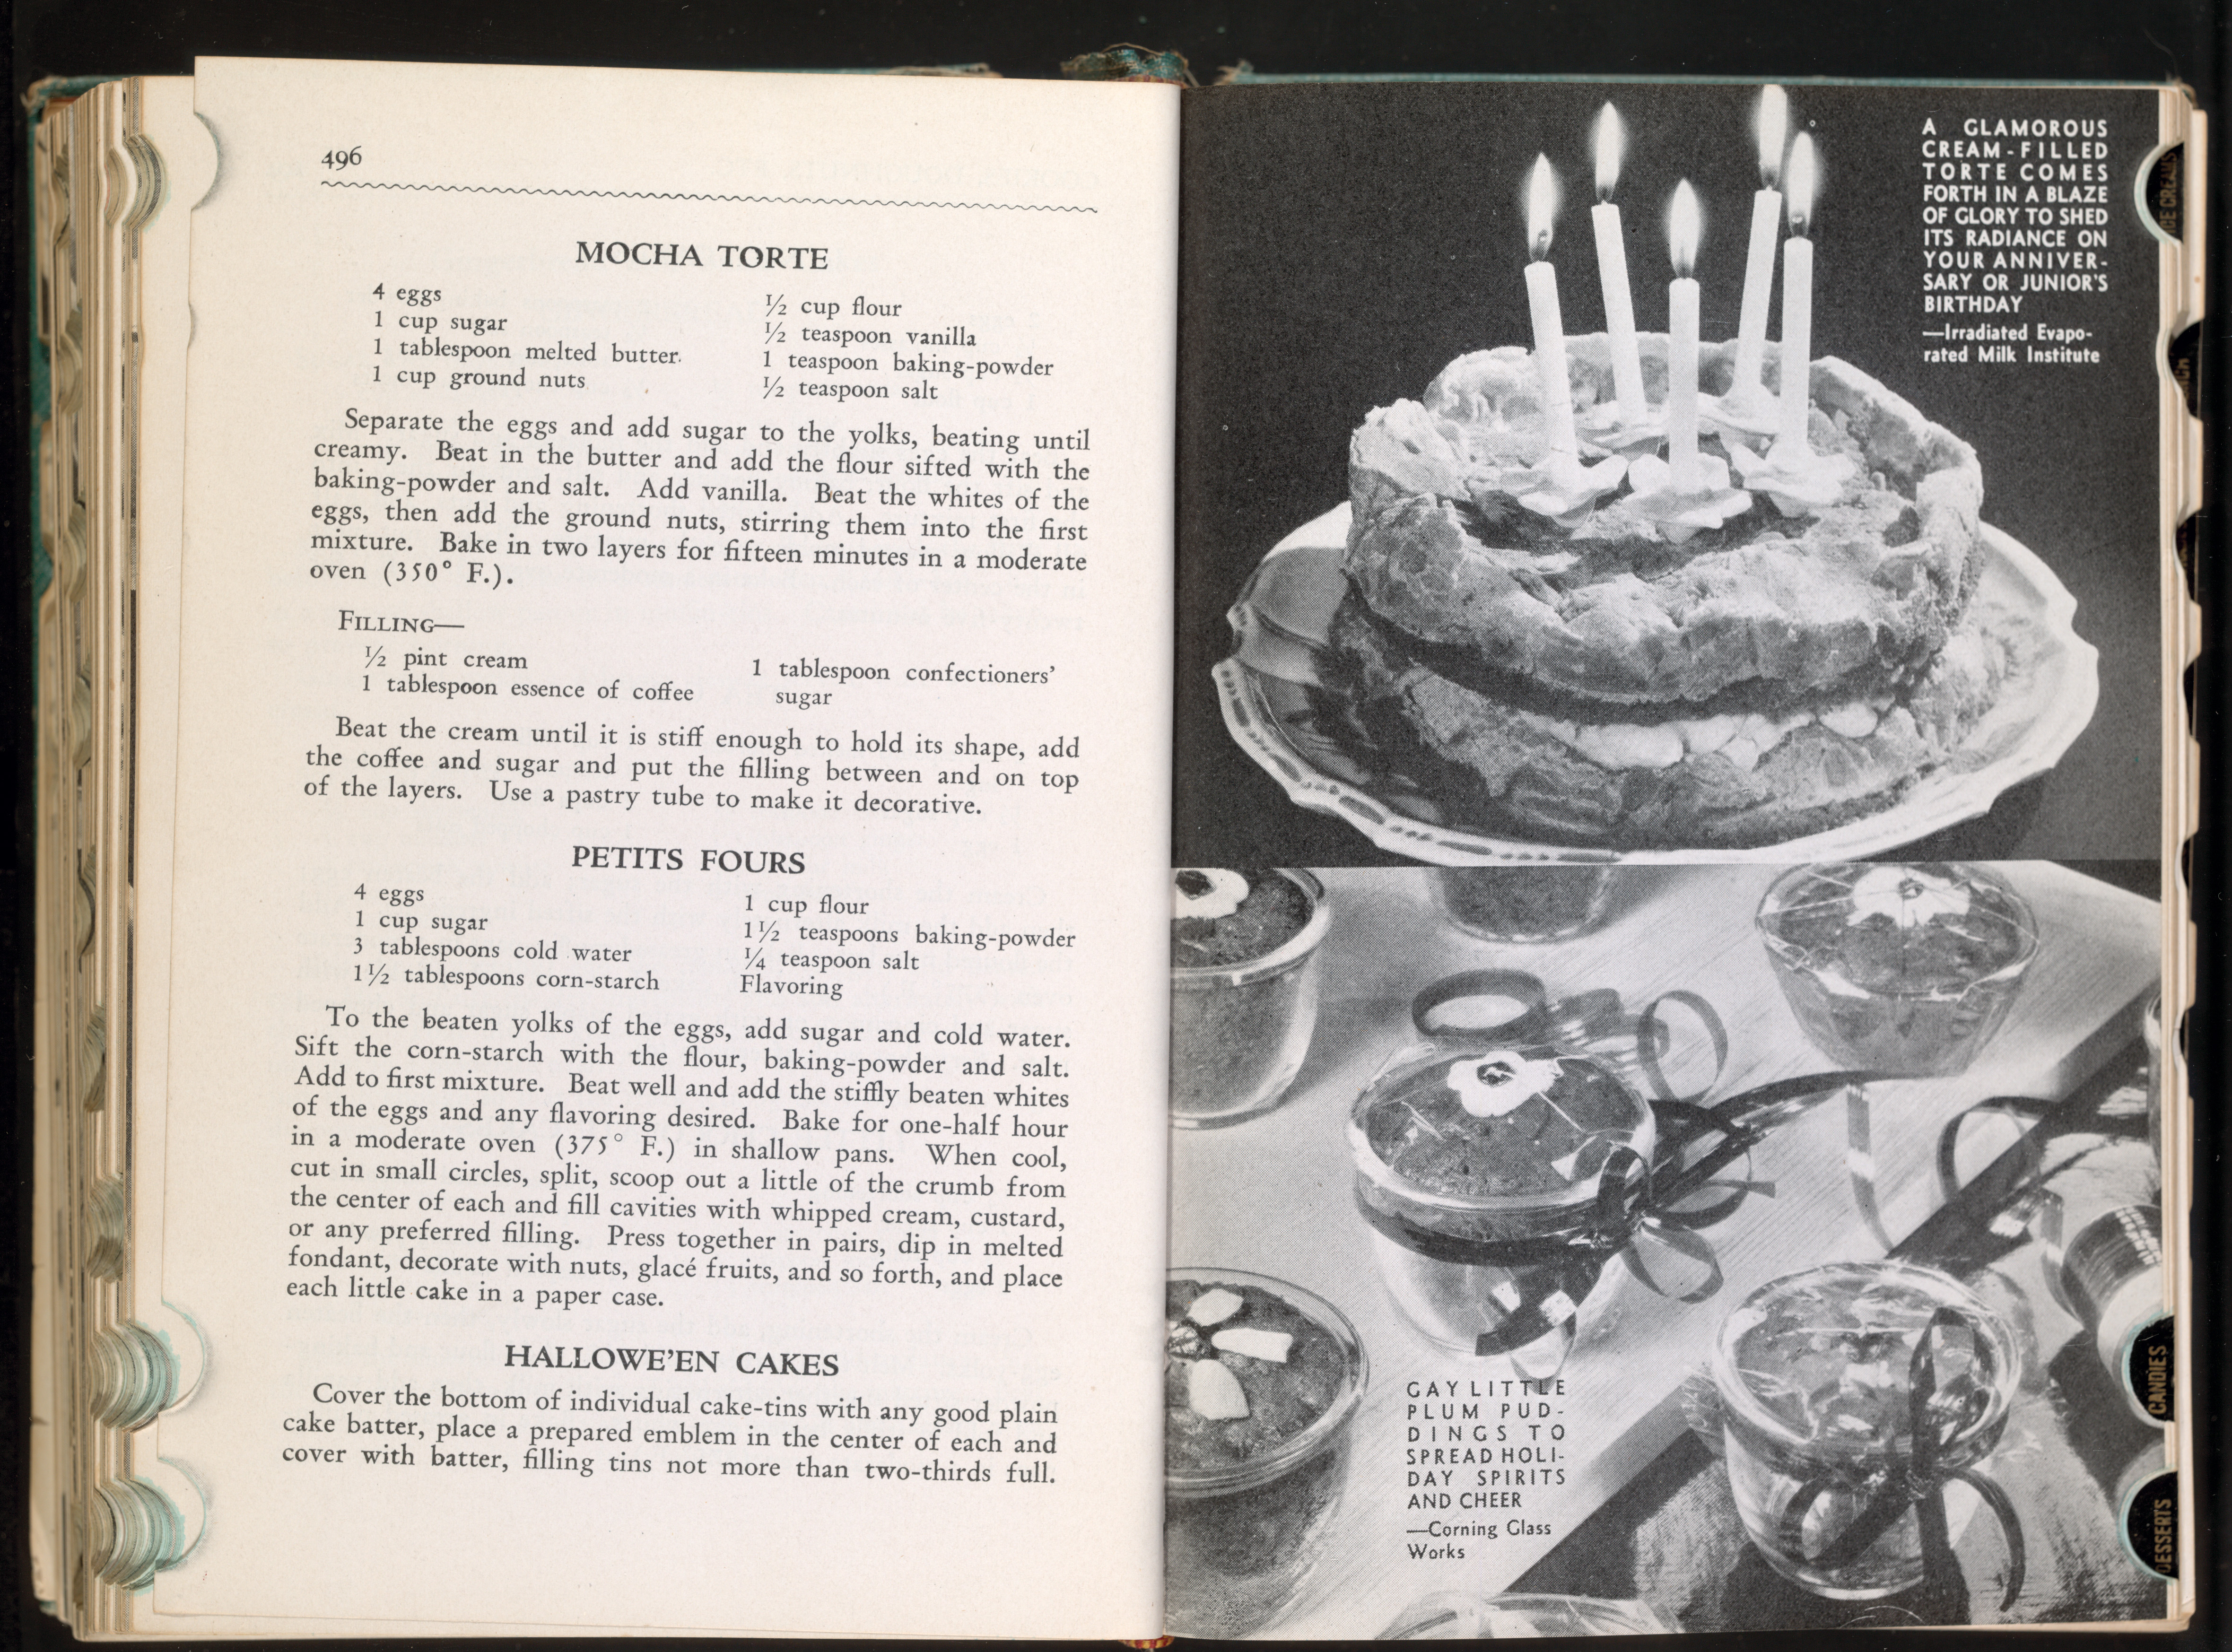 p 496-497, Mocha torte recipe from American Woman’s Cook Book. 